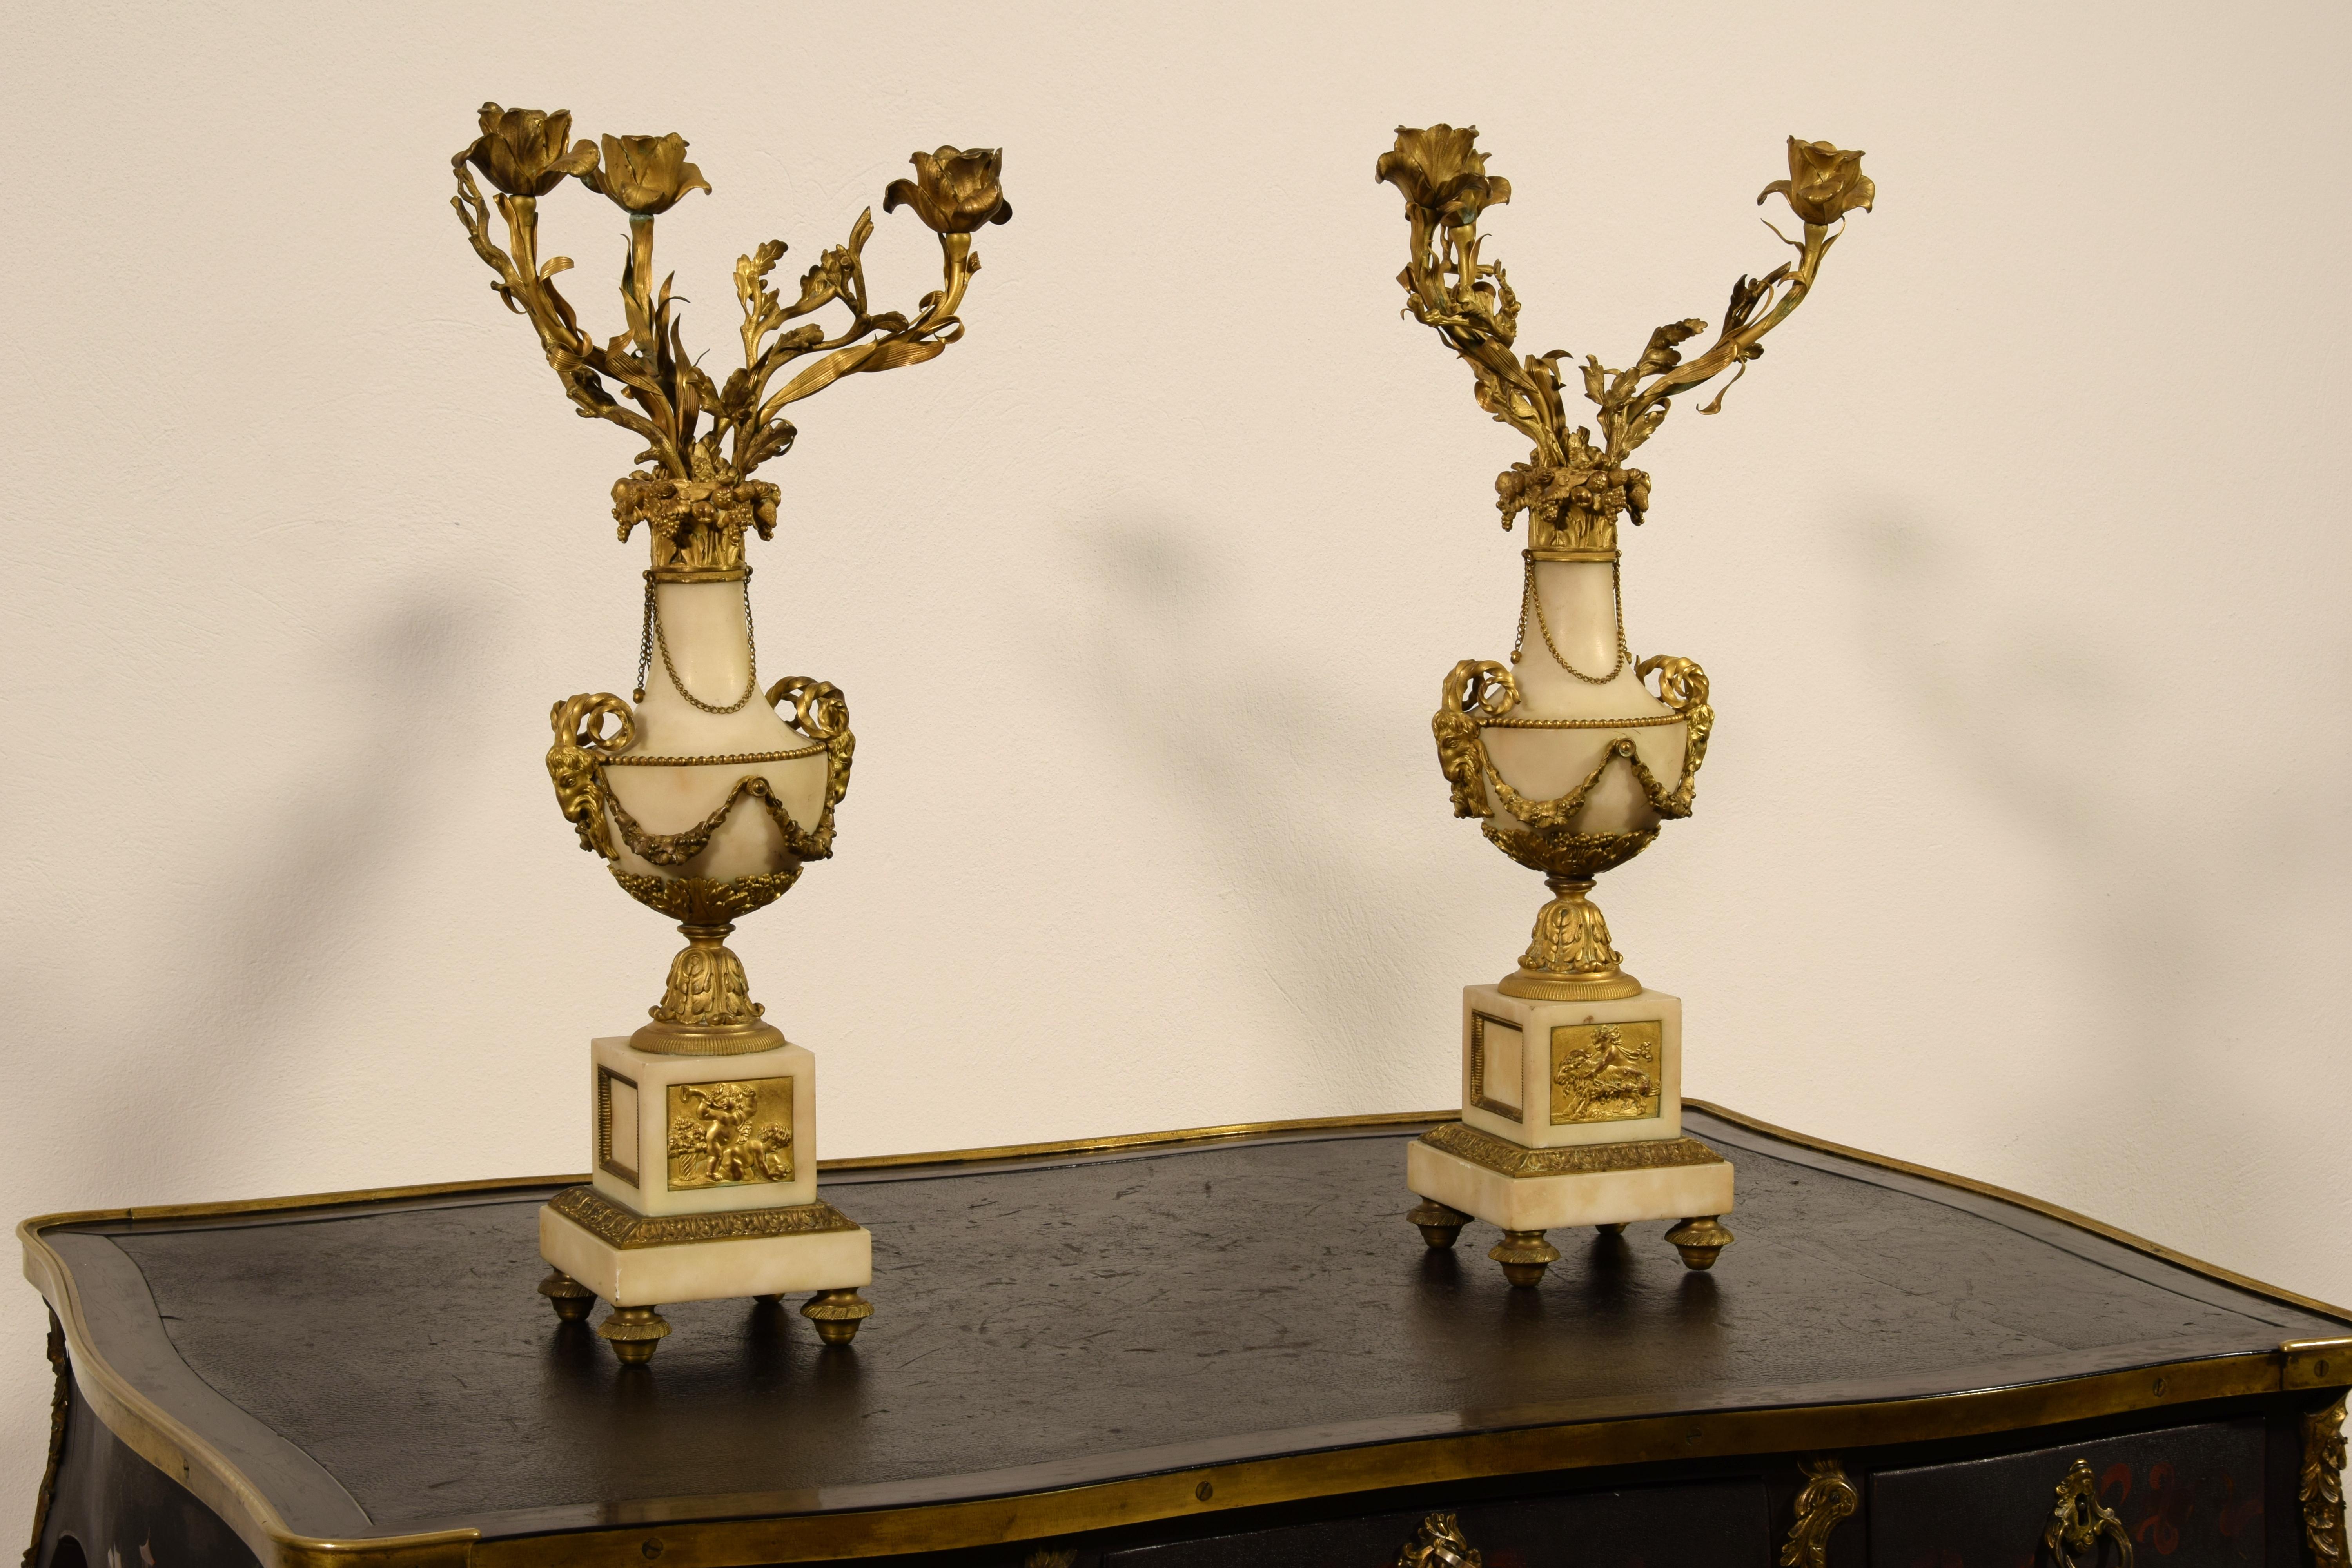 19th century, pair of French gilt bronze and marble candelabra

The pair of three-light candelabra was made in the 19th century in France in the Louis XVI style.
Each candelabra consists of a central part in white marble in the shape of a vase